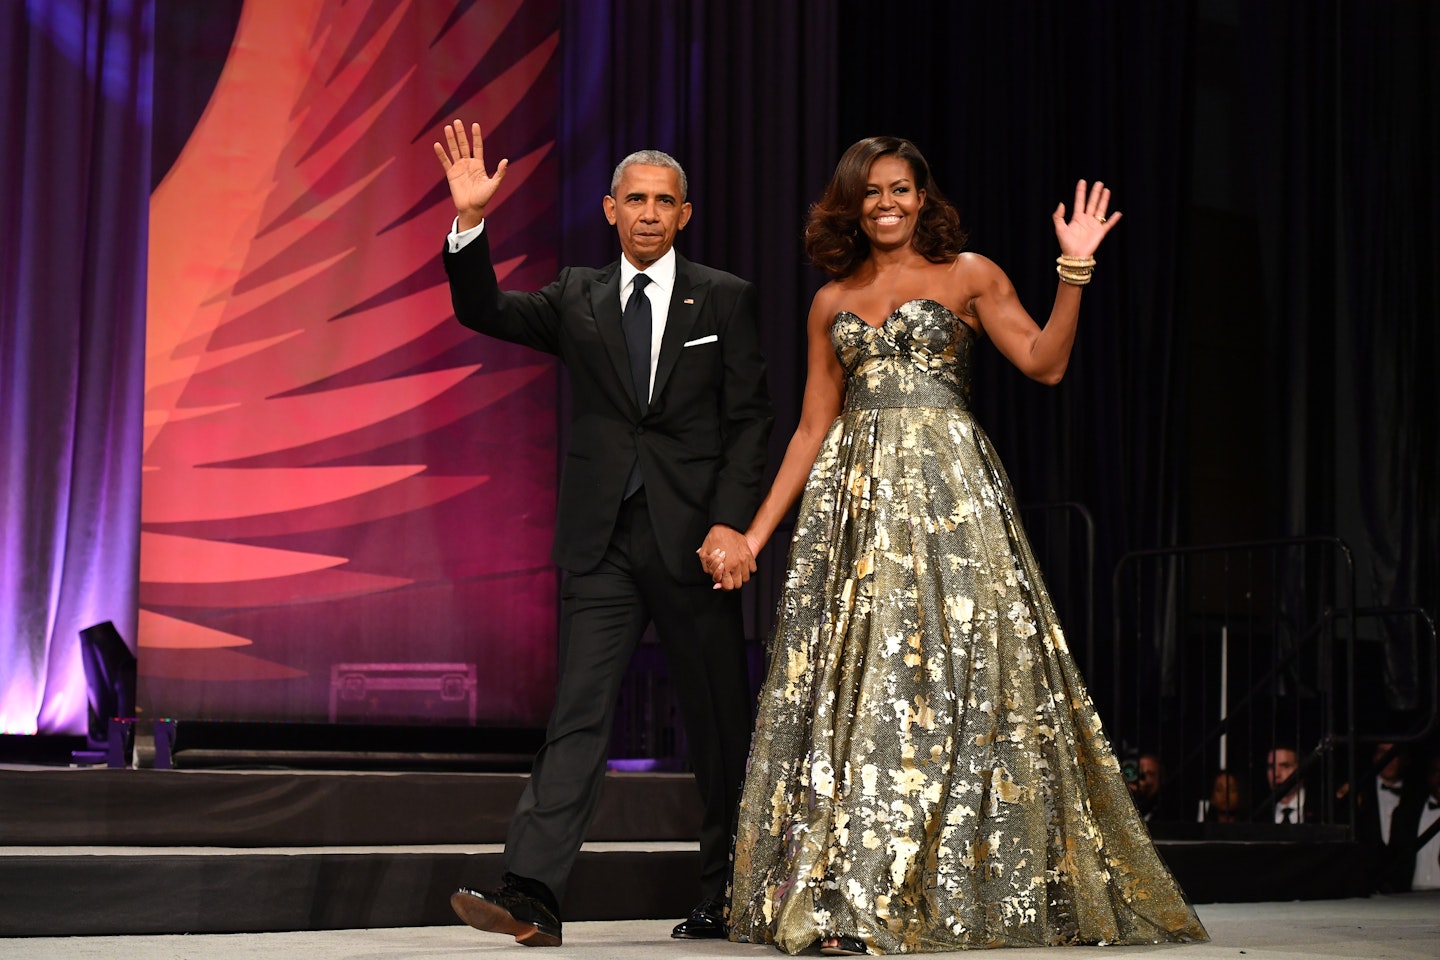 US President Barack Obama and First Lady Michelle Obama arrive on stage during the Congressional Black Caucus Foundation's Phoenix Awards Dinner on September 17, 2016 in Washington.